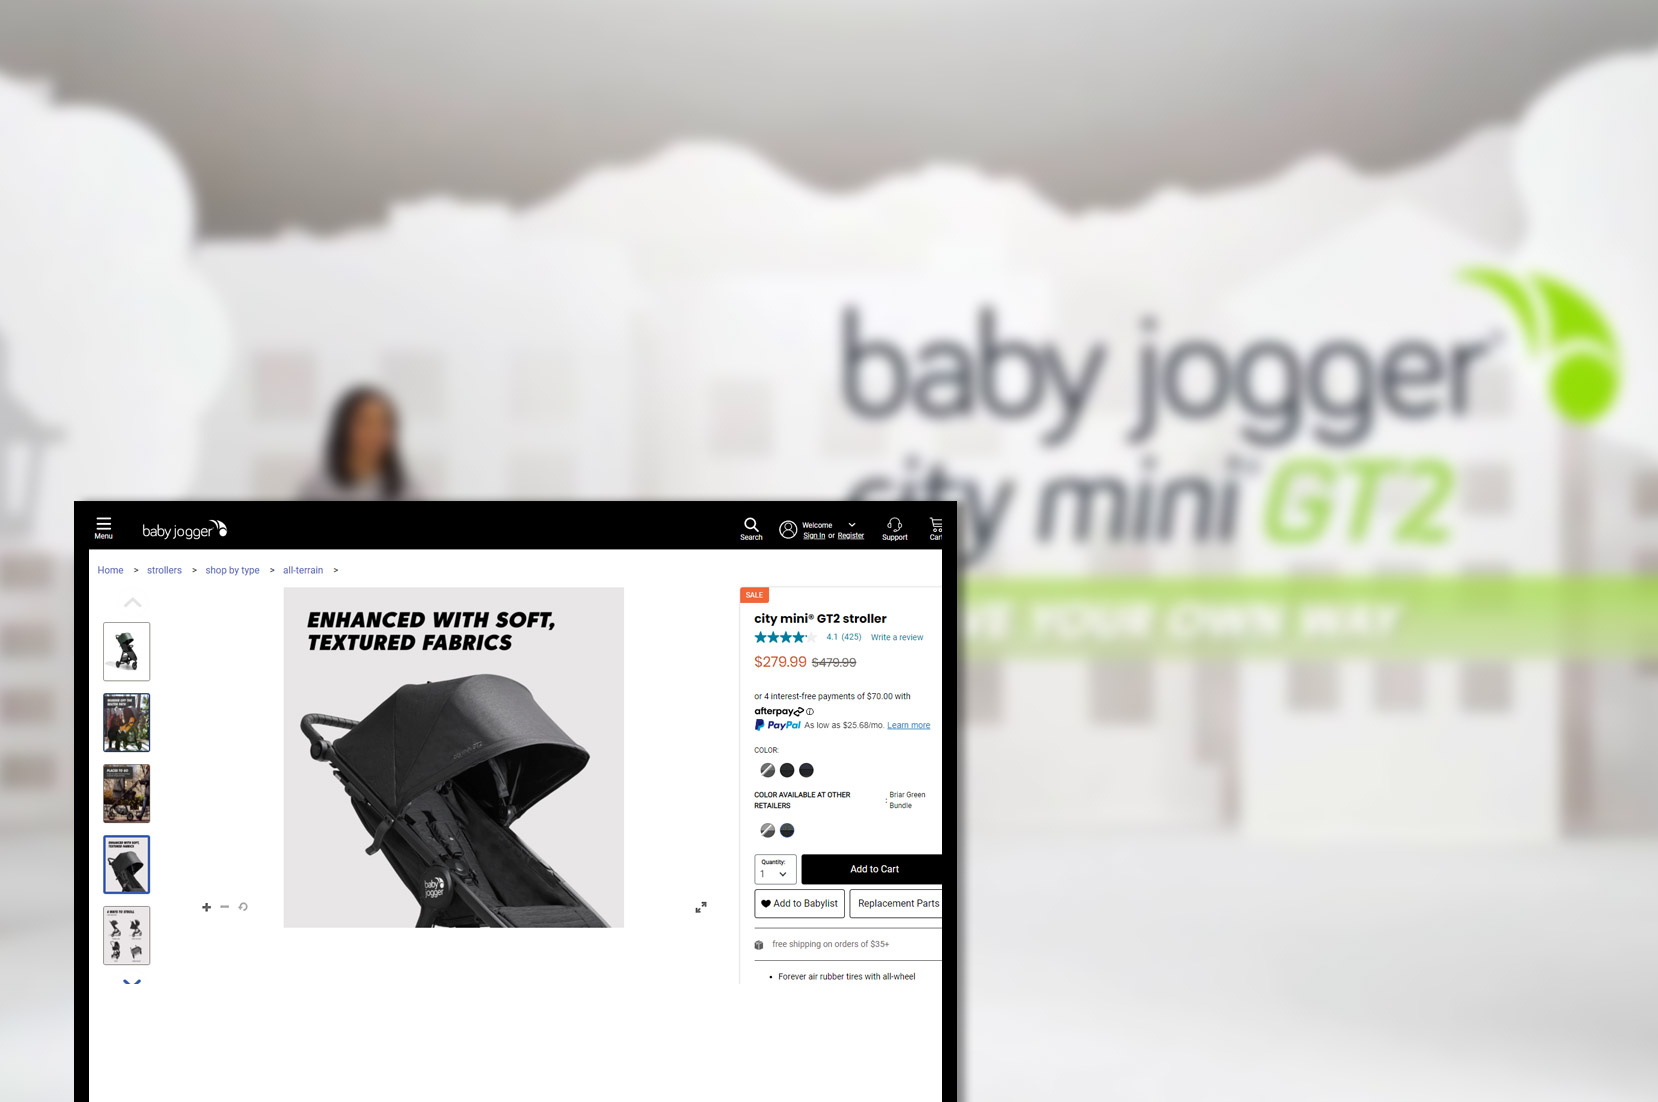 babyjogger-comproduct-pricing-information-and-image-scraping-services